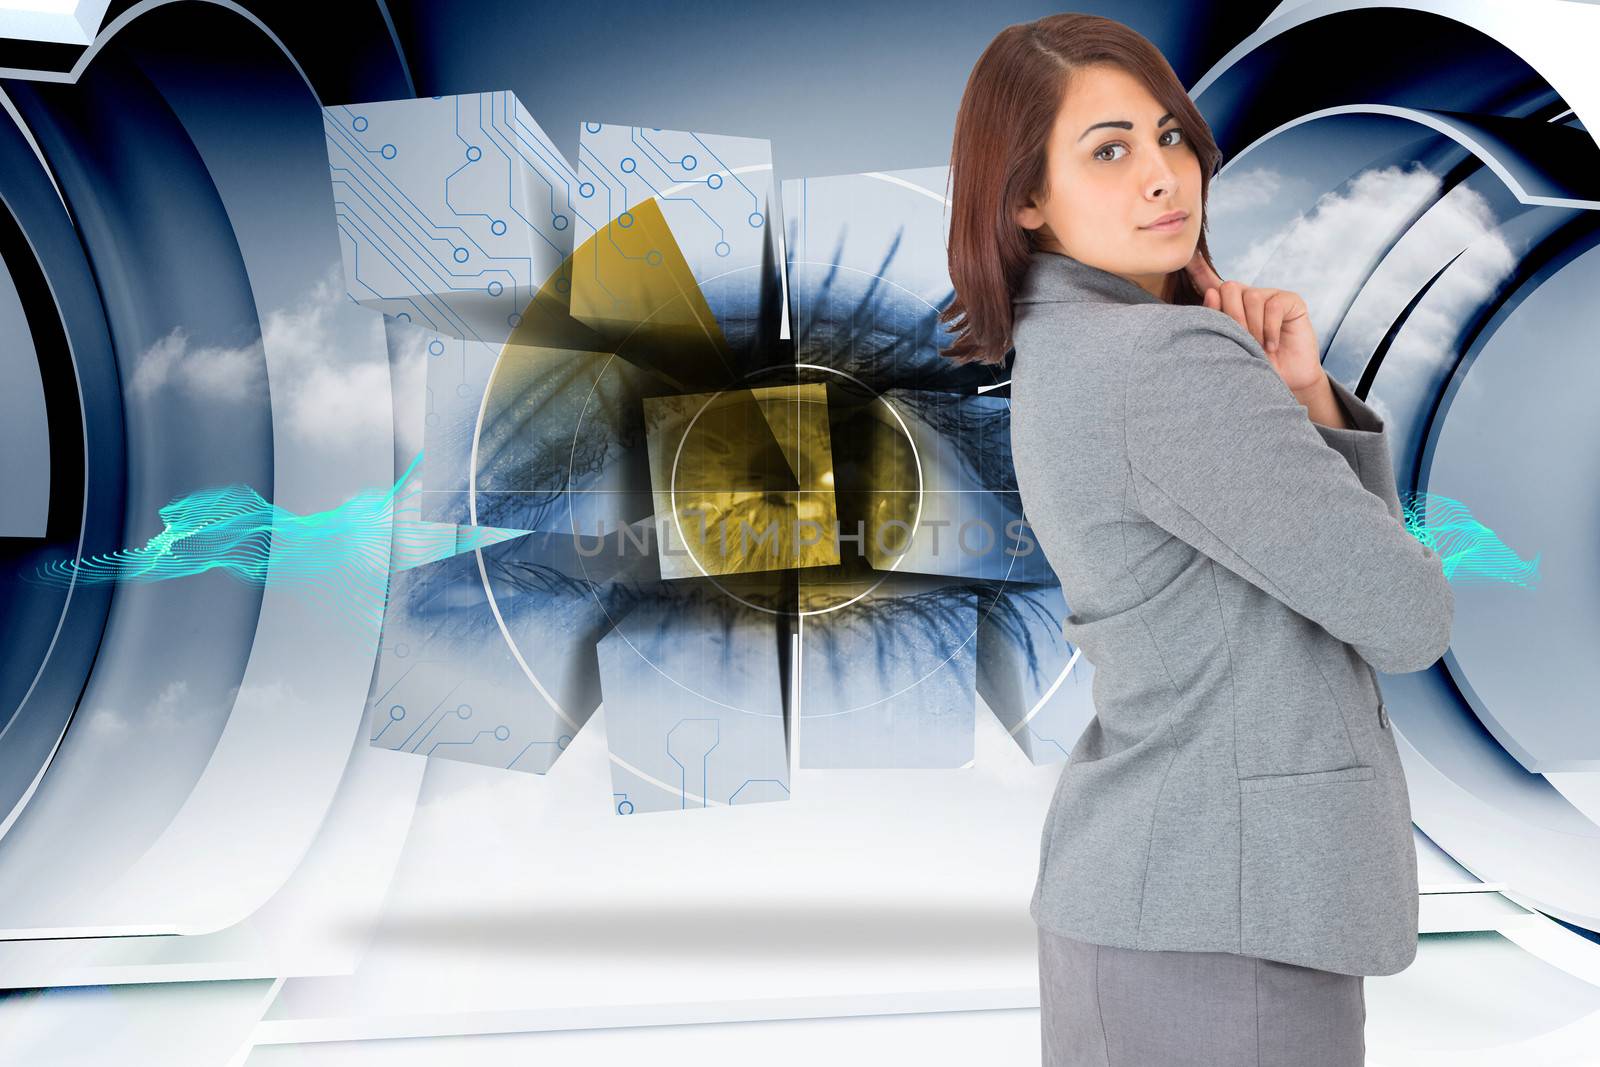 Concentrating businesswoman against abstract blue cloud design in futuristic structure